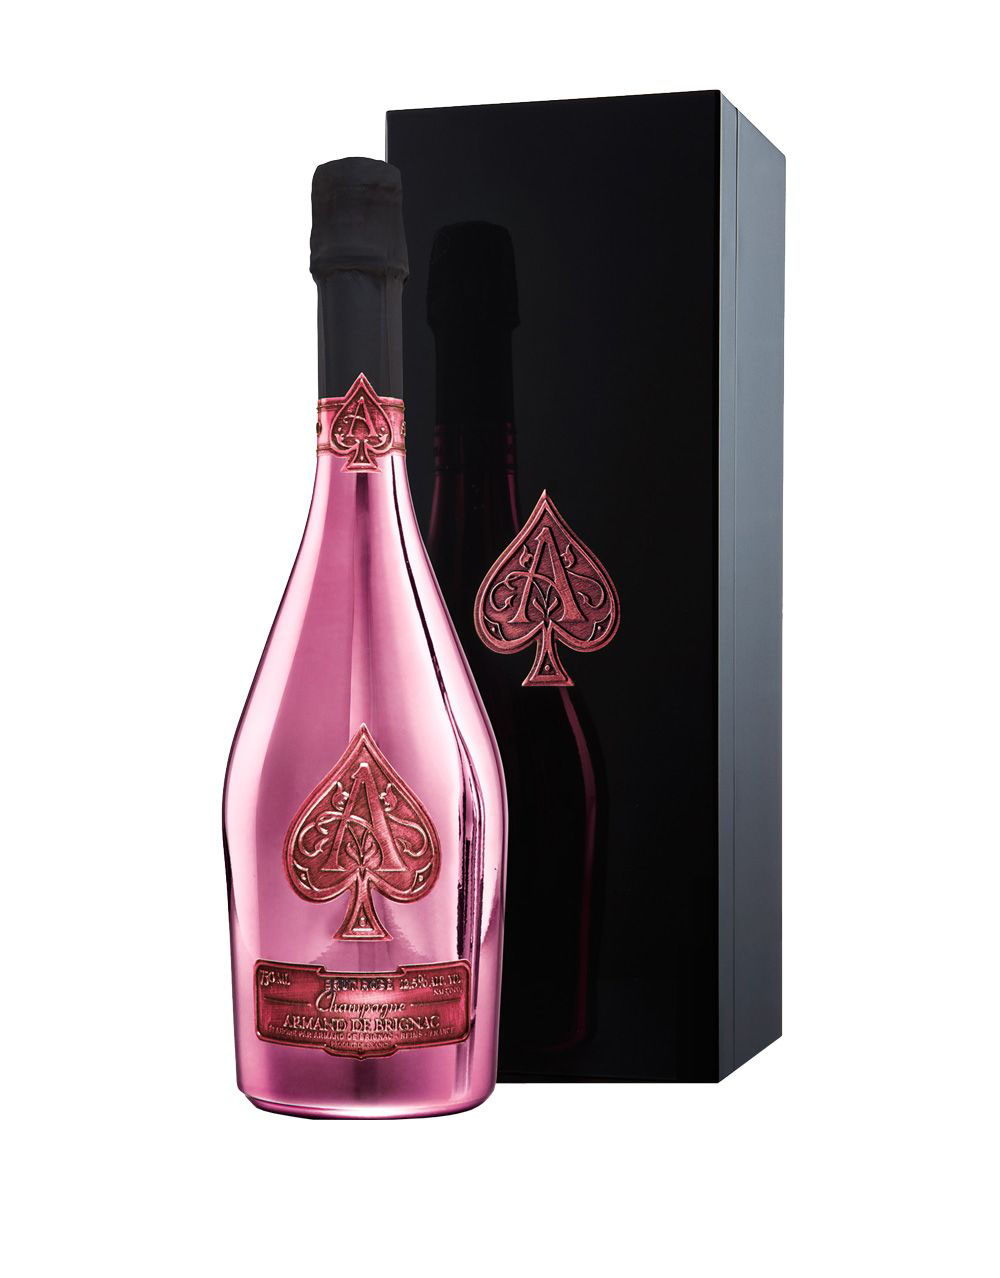 Perrier Jouet Belle Epoque Brut 2007 Limited Edition small Discoveries By Mischer Traxler